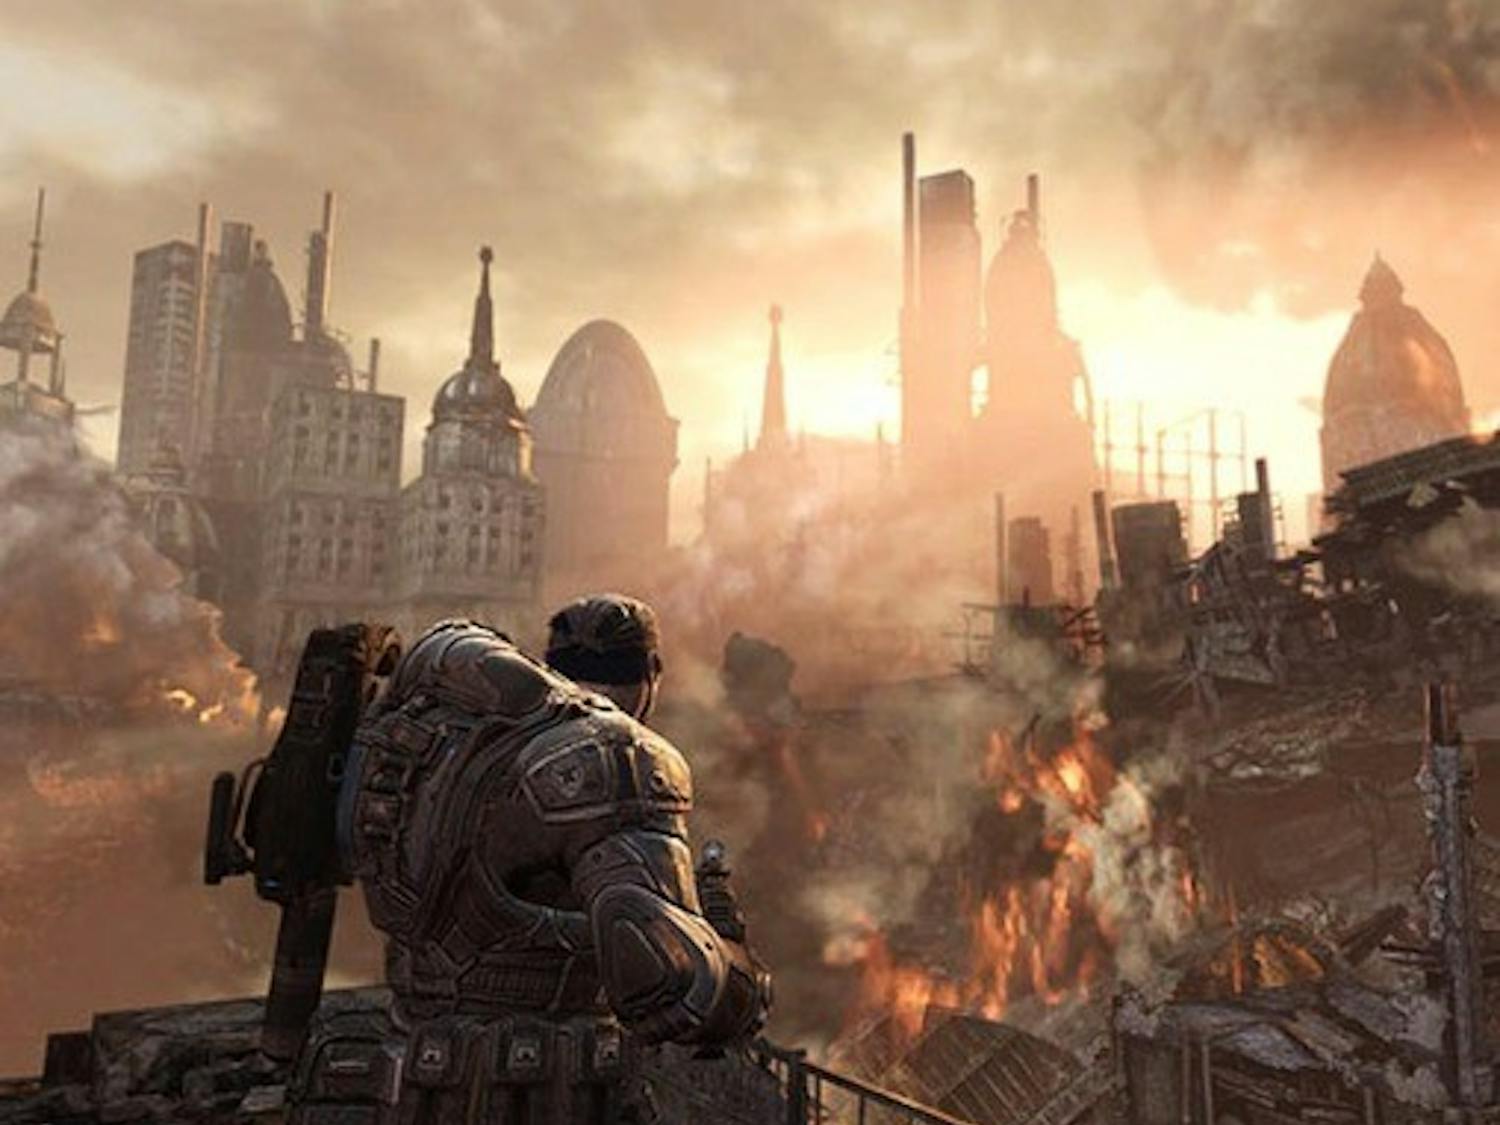 'Gears of War' grinds out solid second